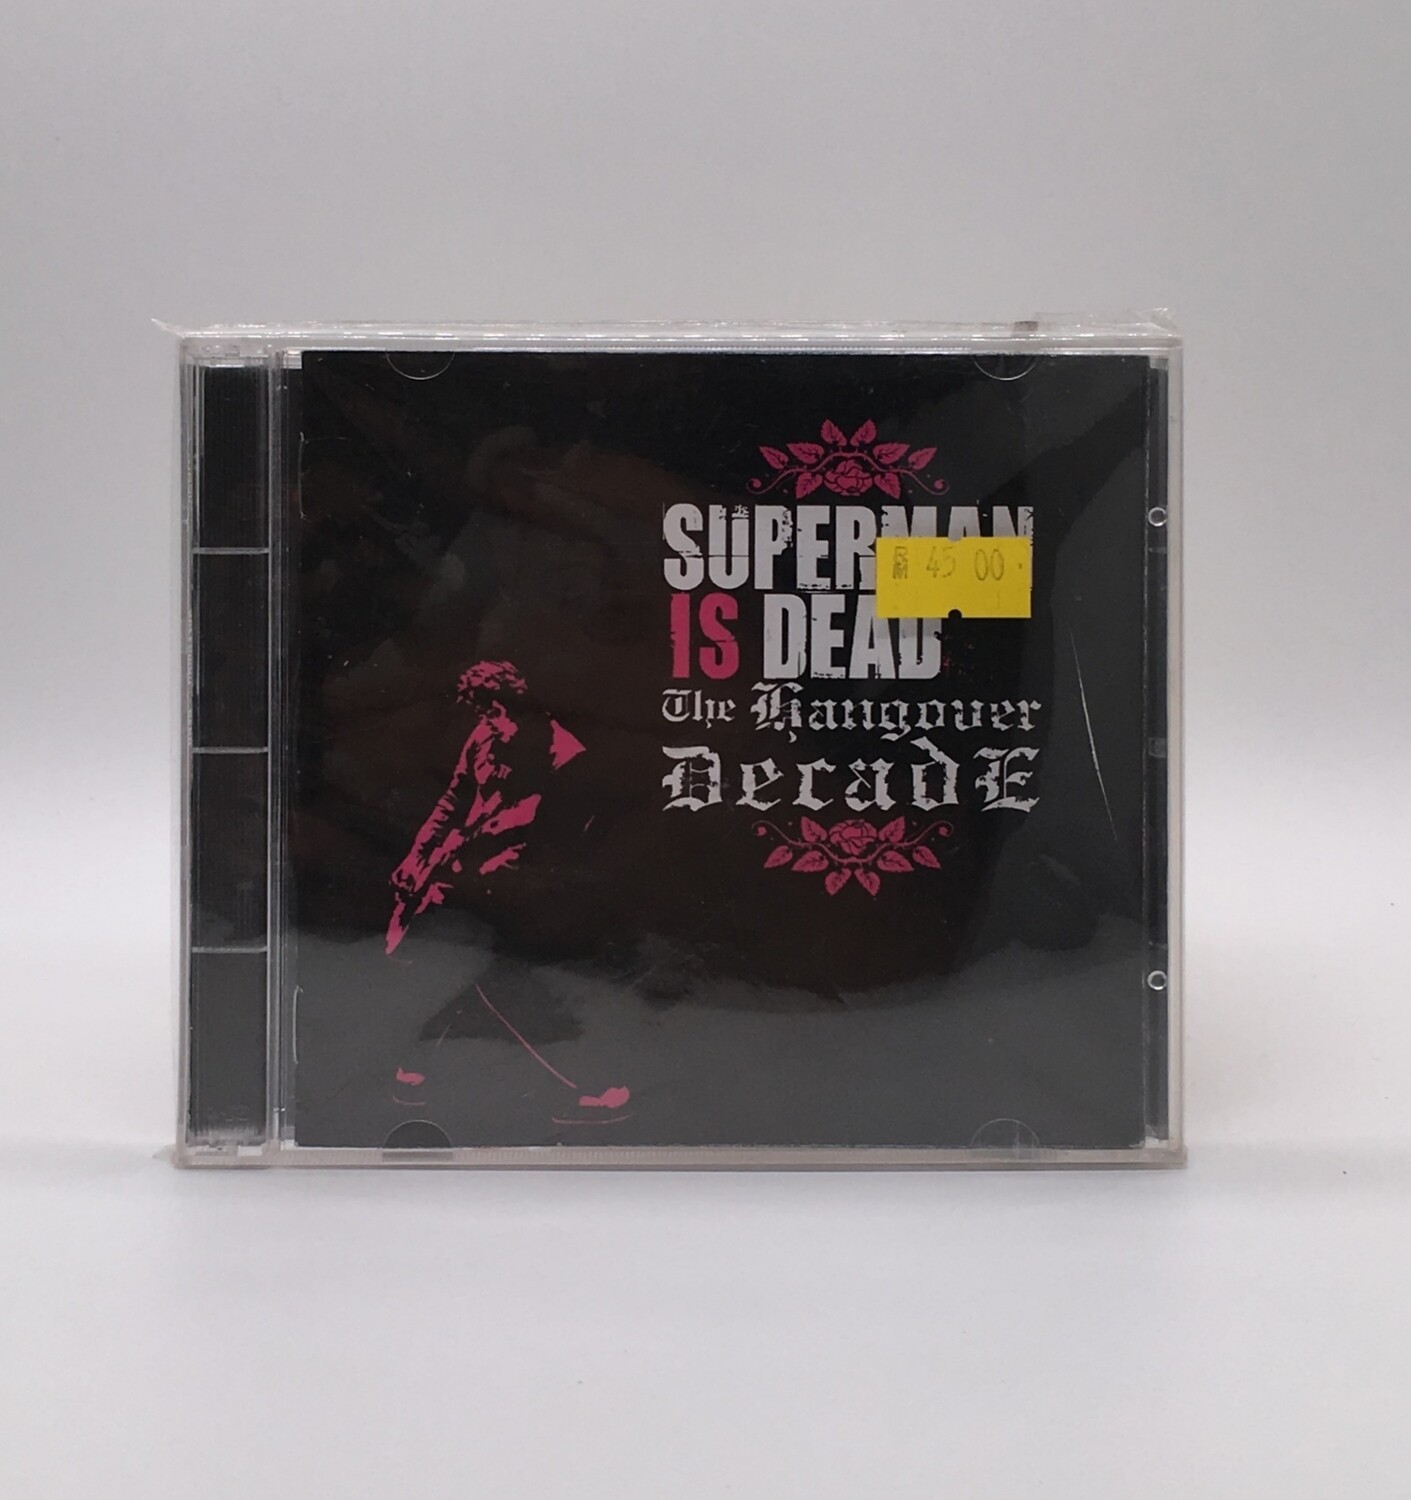 SUPERMAN IS DEAD -THE HANGOVER DECAFE- CD